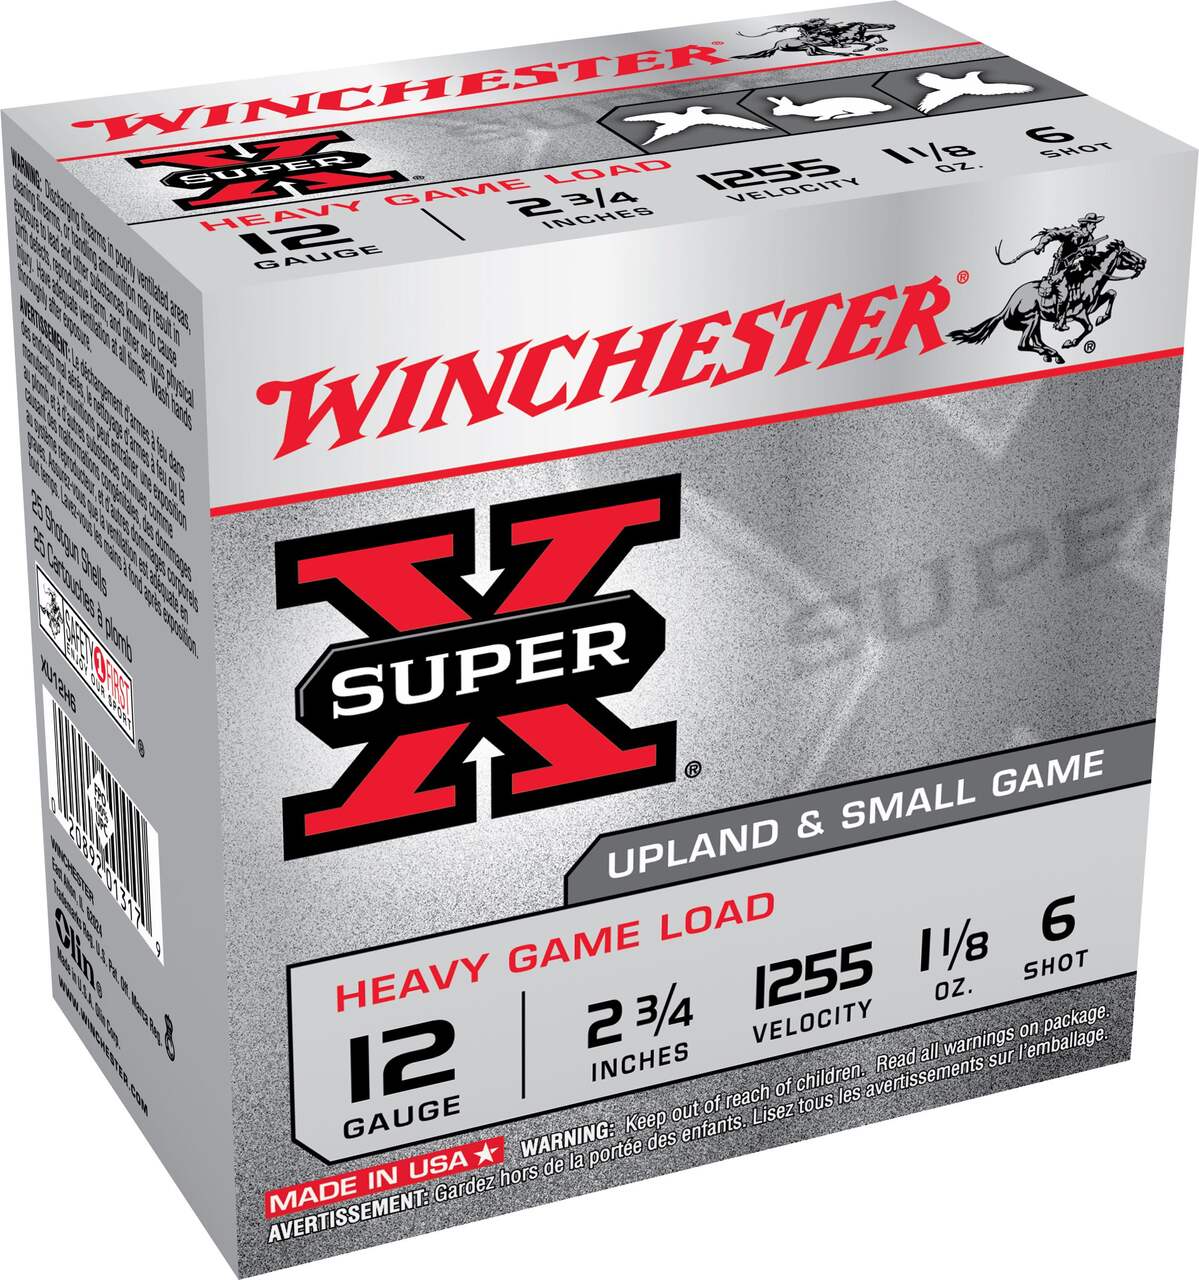 https://media-www.canadiantire.ca/product/playing/hunting/ammunition/0751556/lead-shell-12gauge-2-3-4-6-1-1-8-oz-winchester-235f5837-9e42-4324-ac74-e7b080fd102e-jpgrendition.jpg?imdensity=1&imwidth=640&impolicy=mZoom